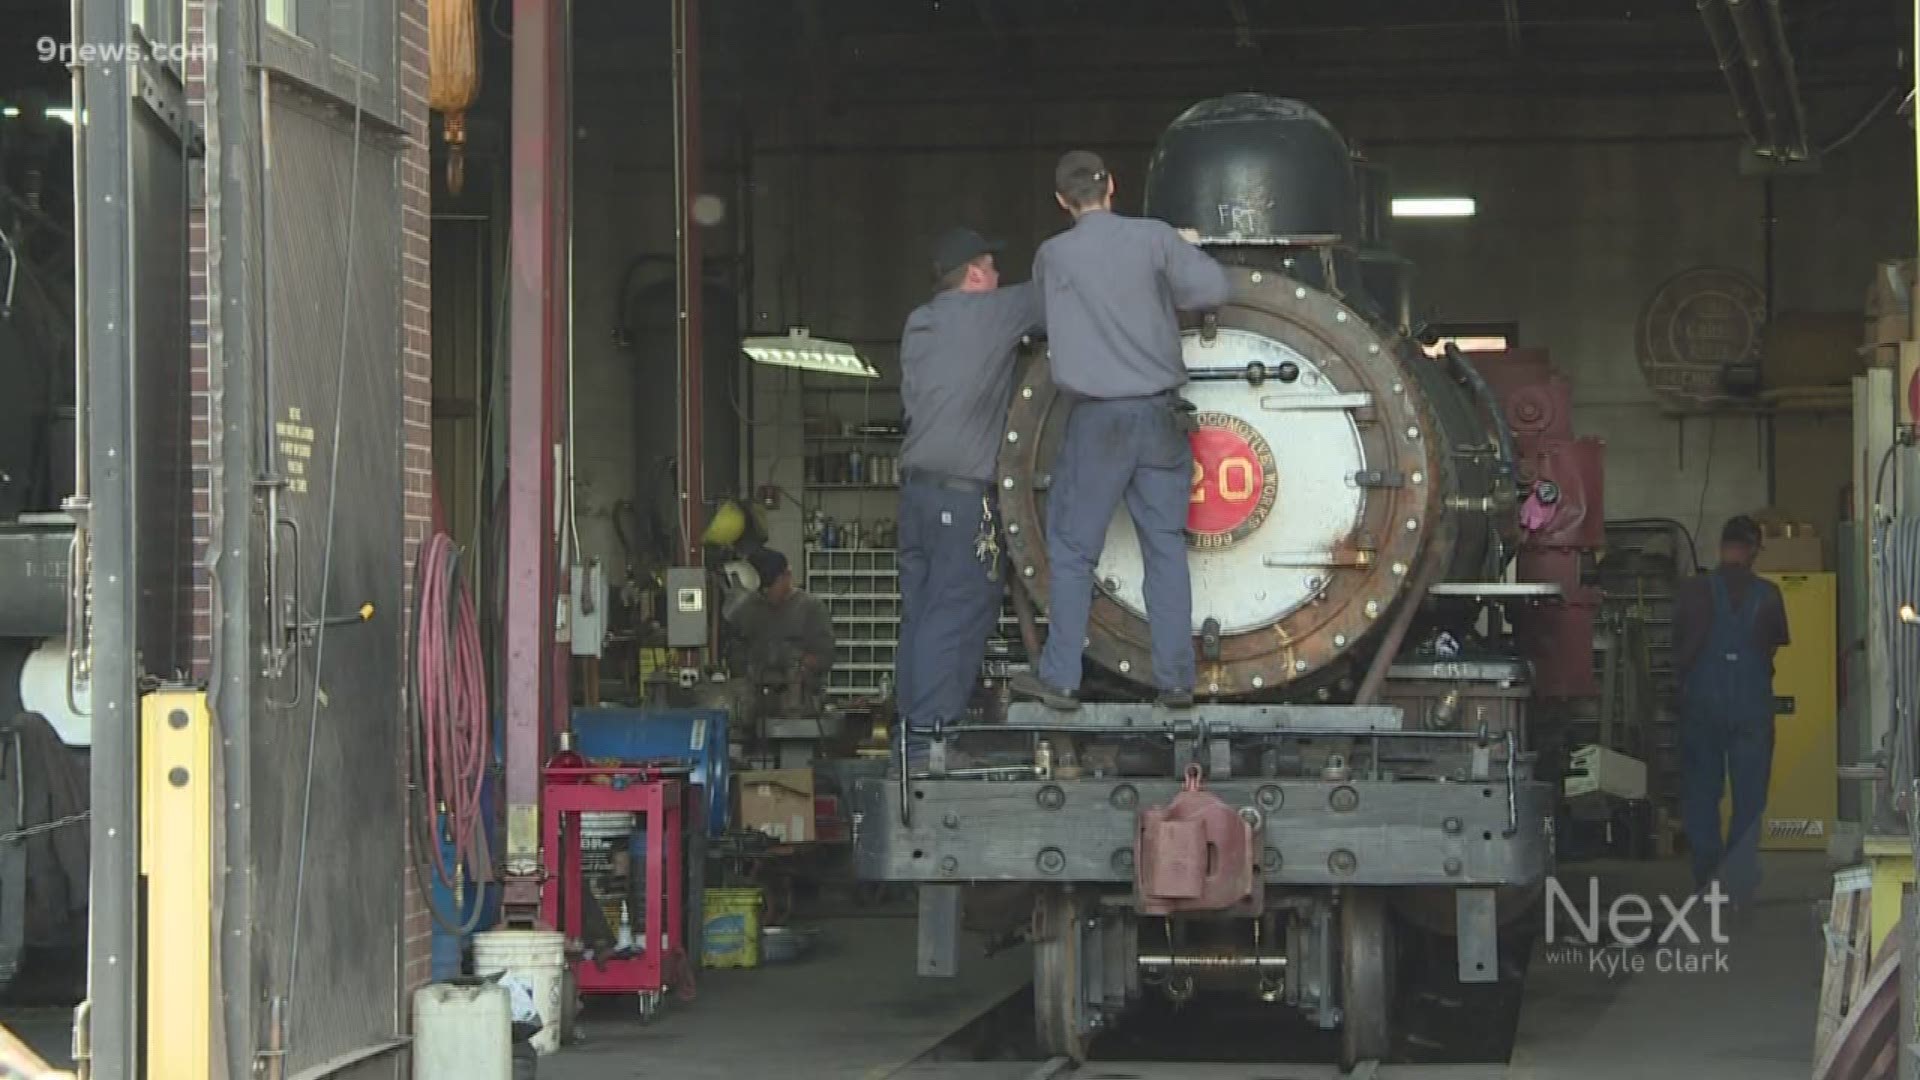 Rio Grande Southern Locomotive Number 20 is back in Colorado after a million dollar restoration project that took 13 years.